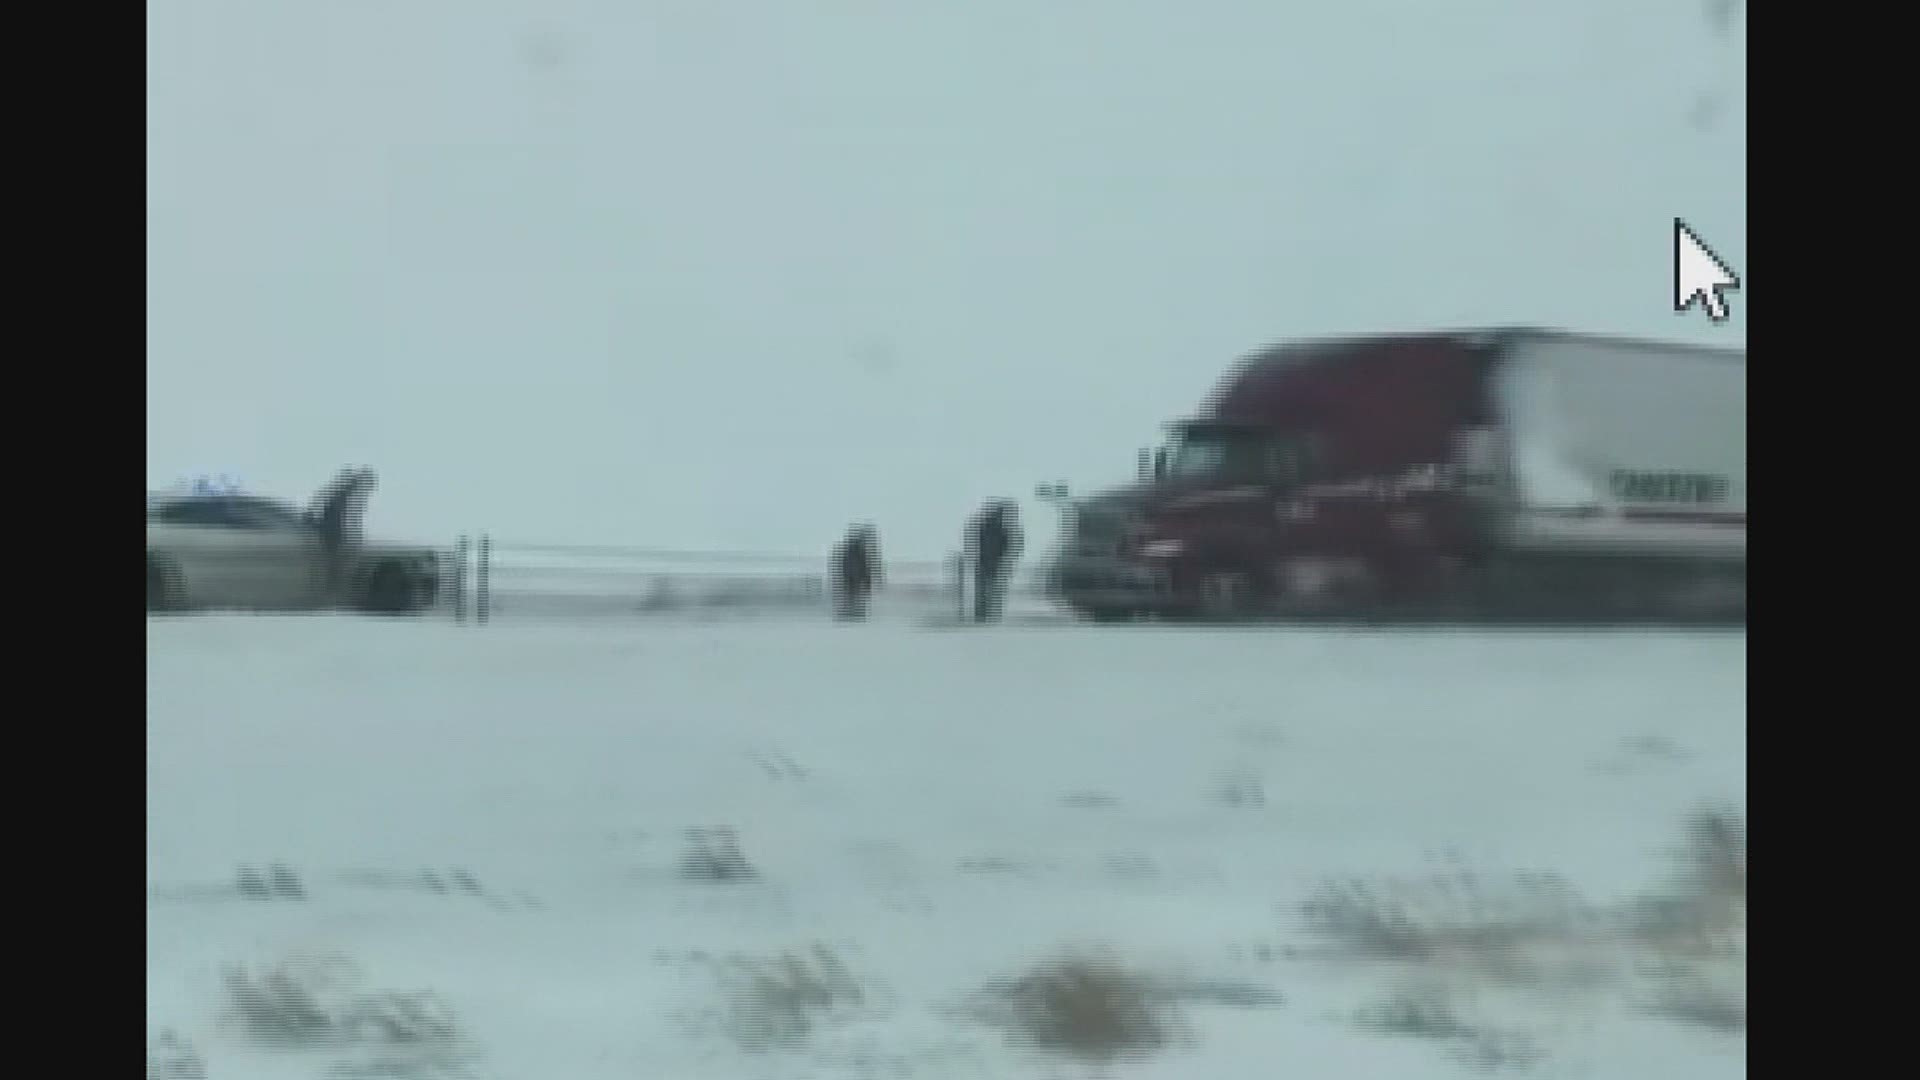 A total of 14 officers, seven ambulances and several tow trucks are responding to a multi-vehicle crash on I-80 near Newton.